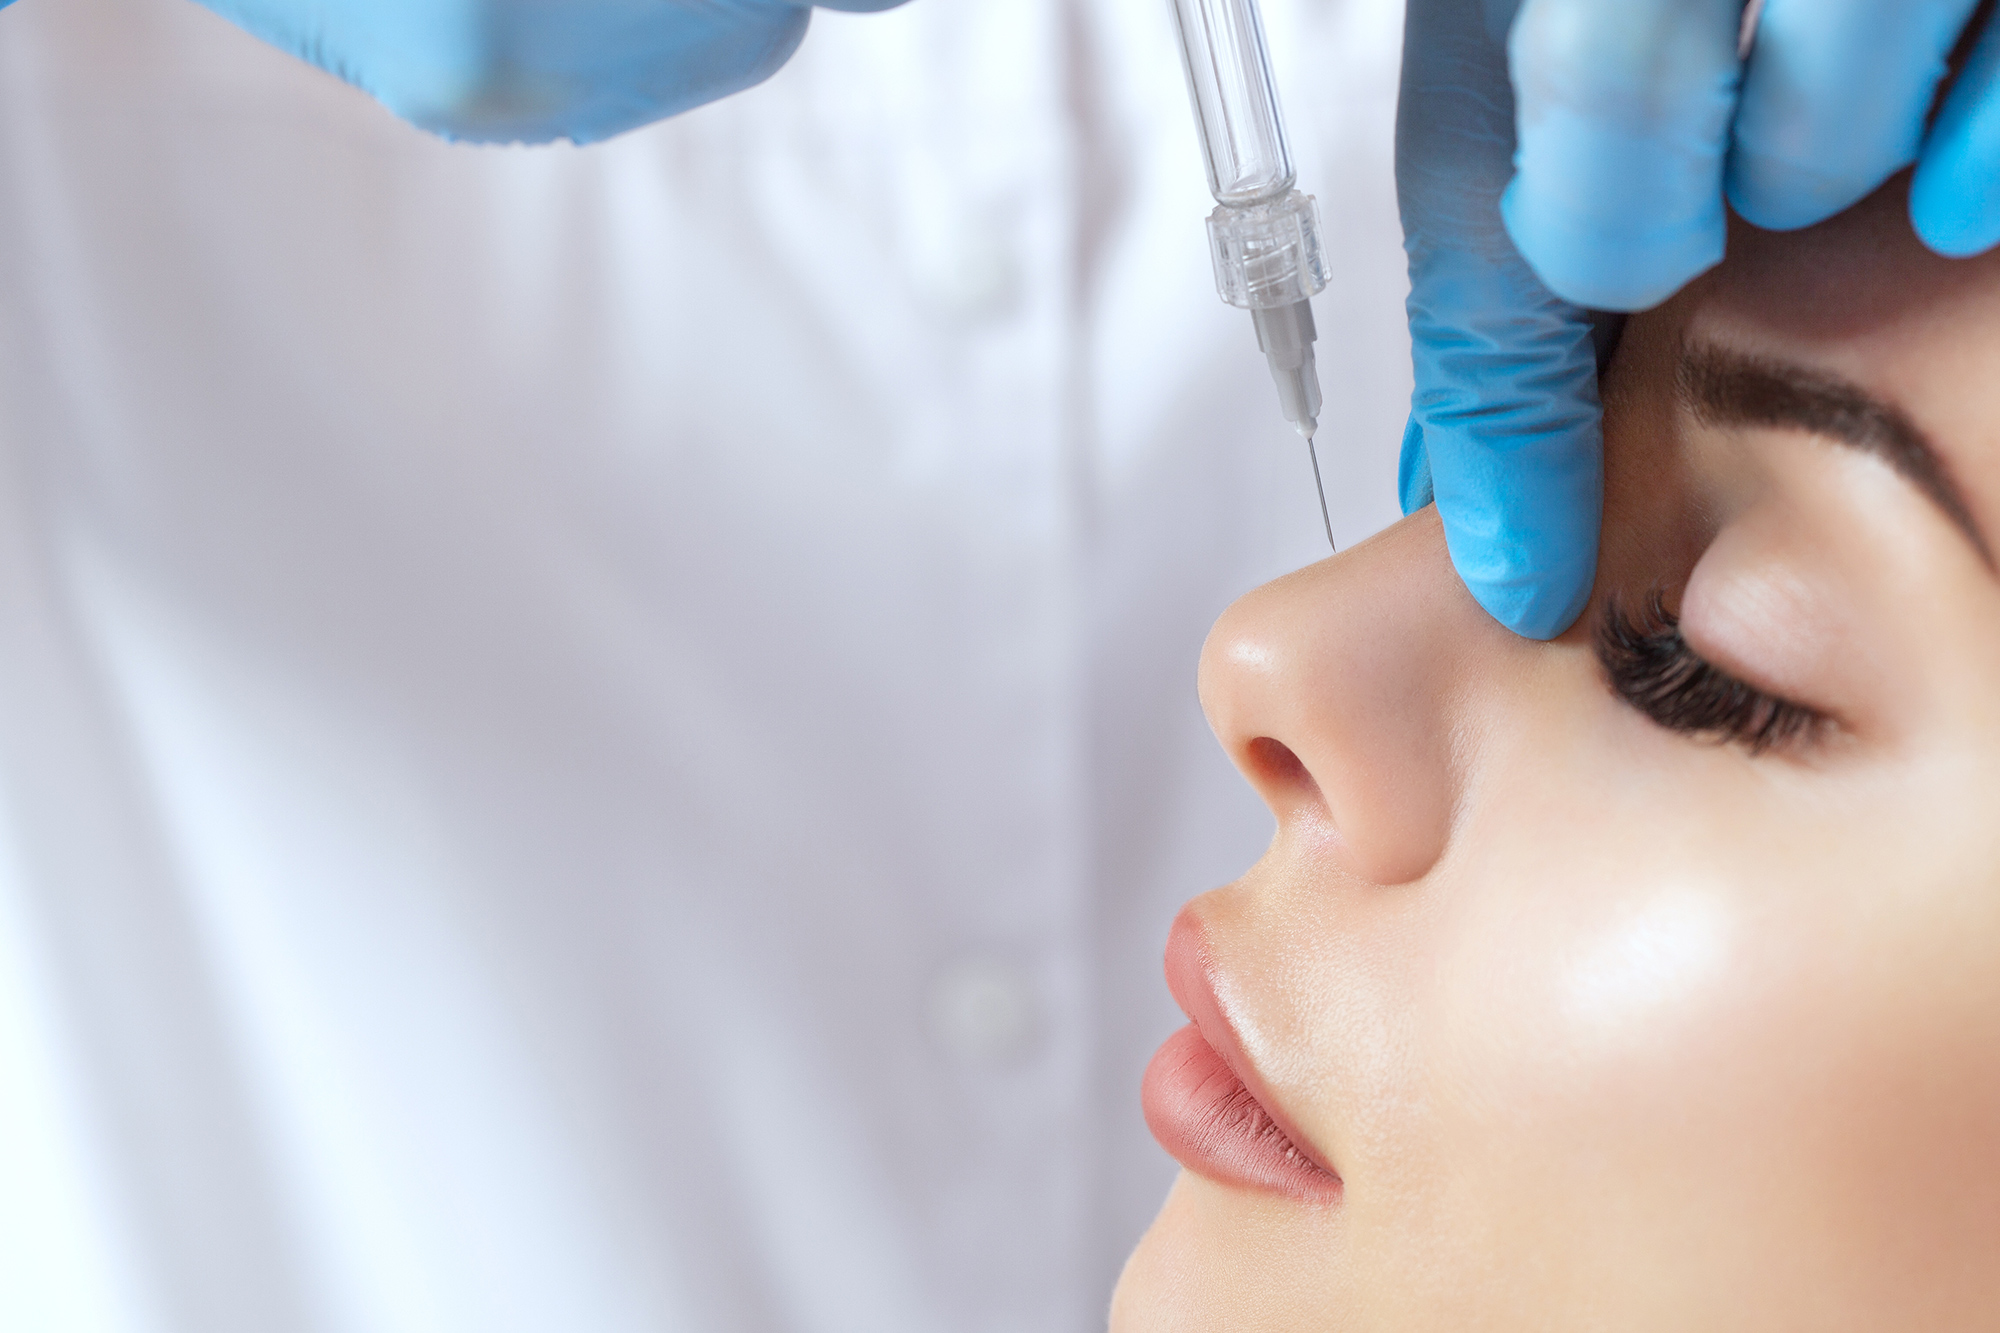 Botox for the Nose - Nasal Slimming, Nostril Flaring, Raise the Nasal Tip & Treat Bunny Lines